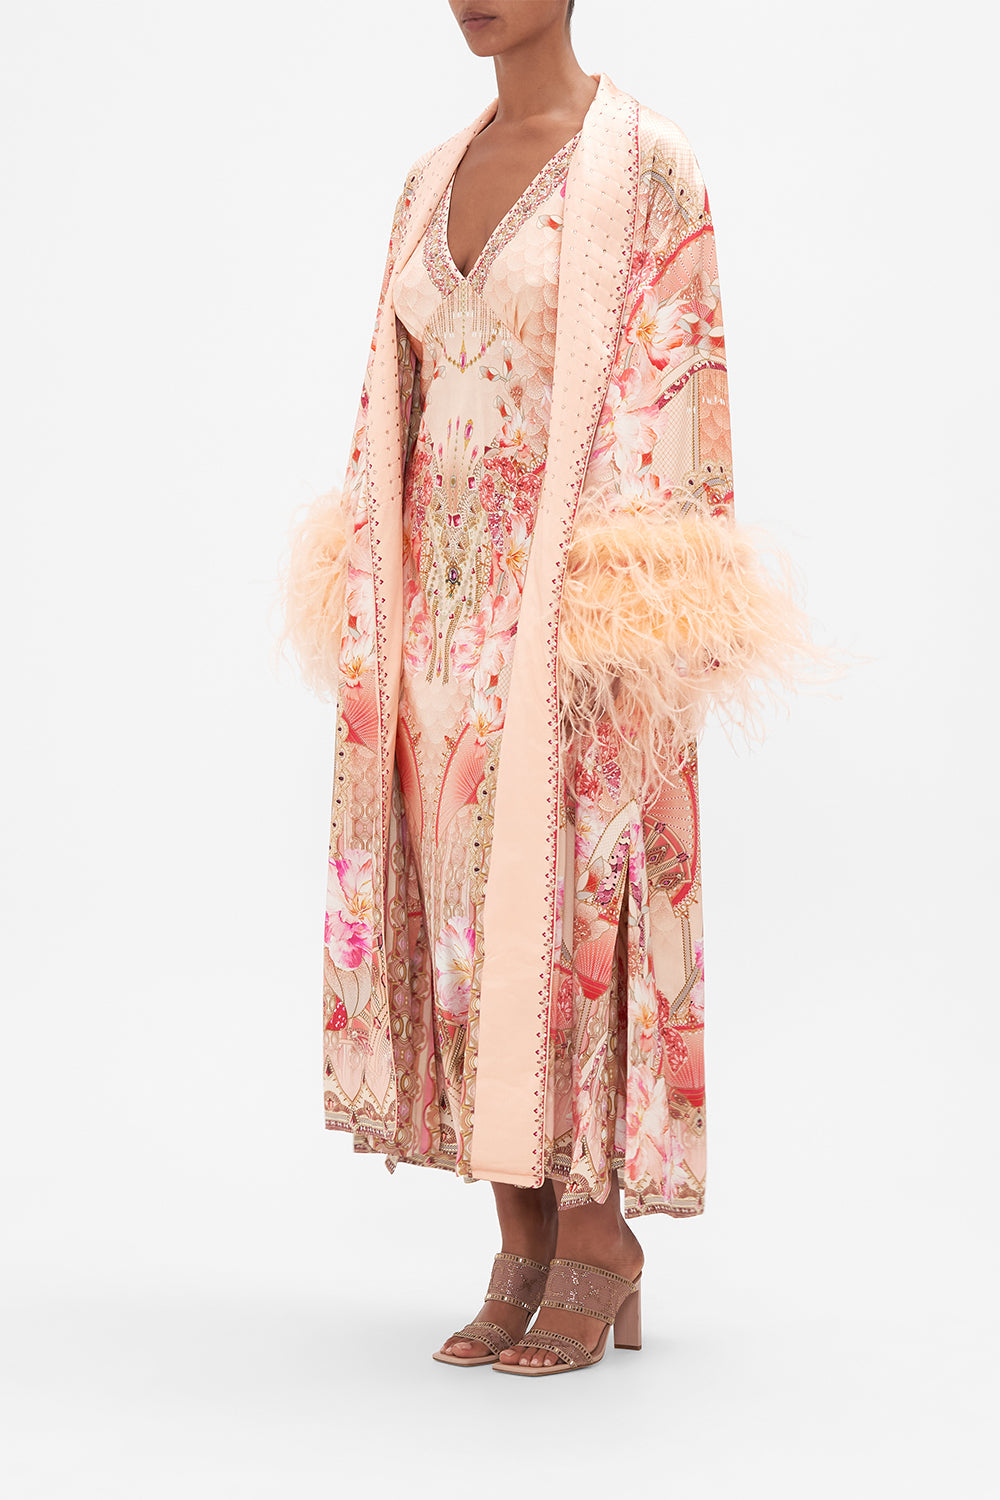 Side view of model wearing CAMILLA silk robe with feathers in Adore Me pink floral print